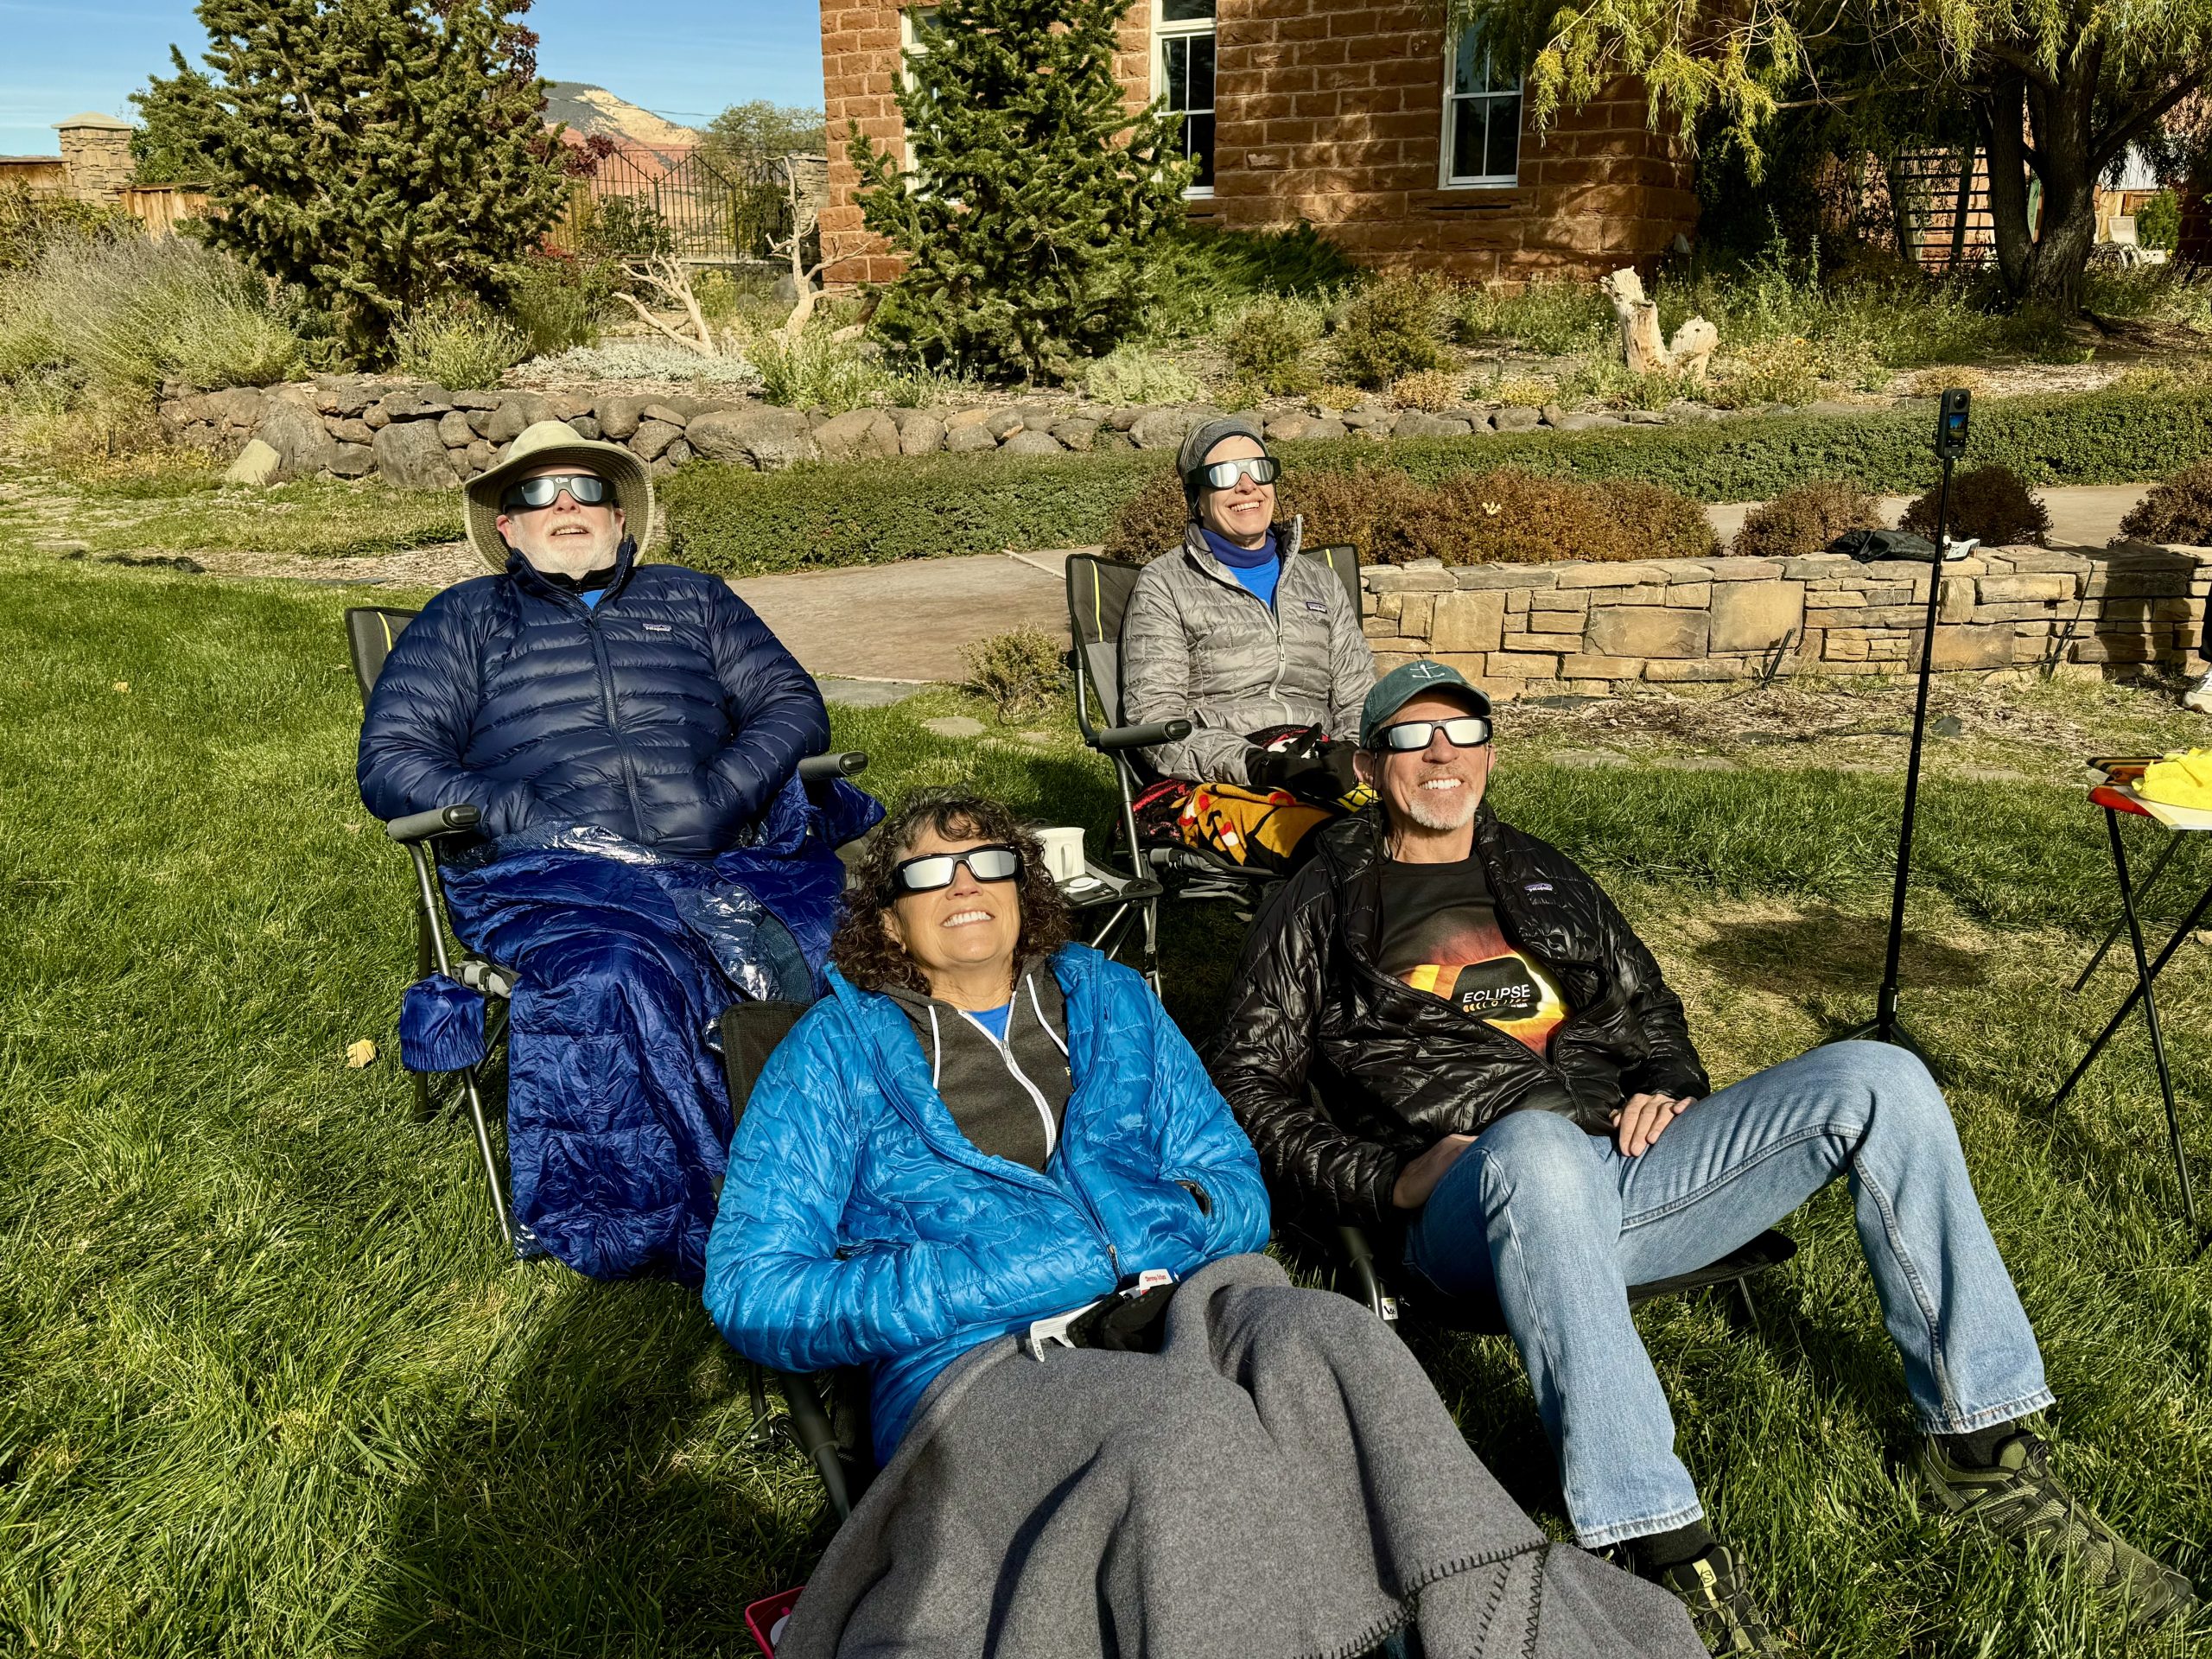 four adults in lawn chairs wearing down jackets with solar glasses on staring at the sun